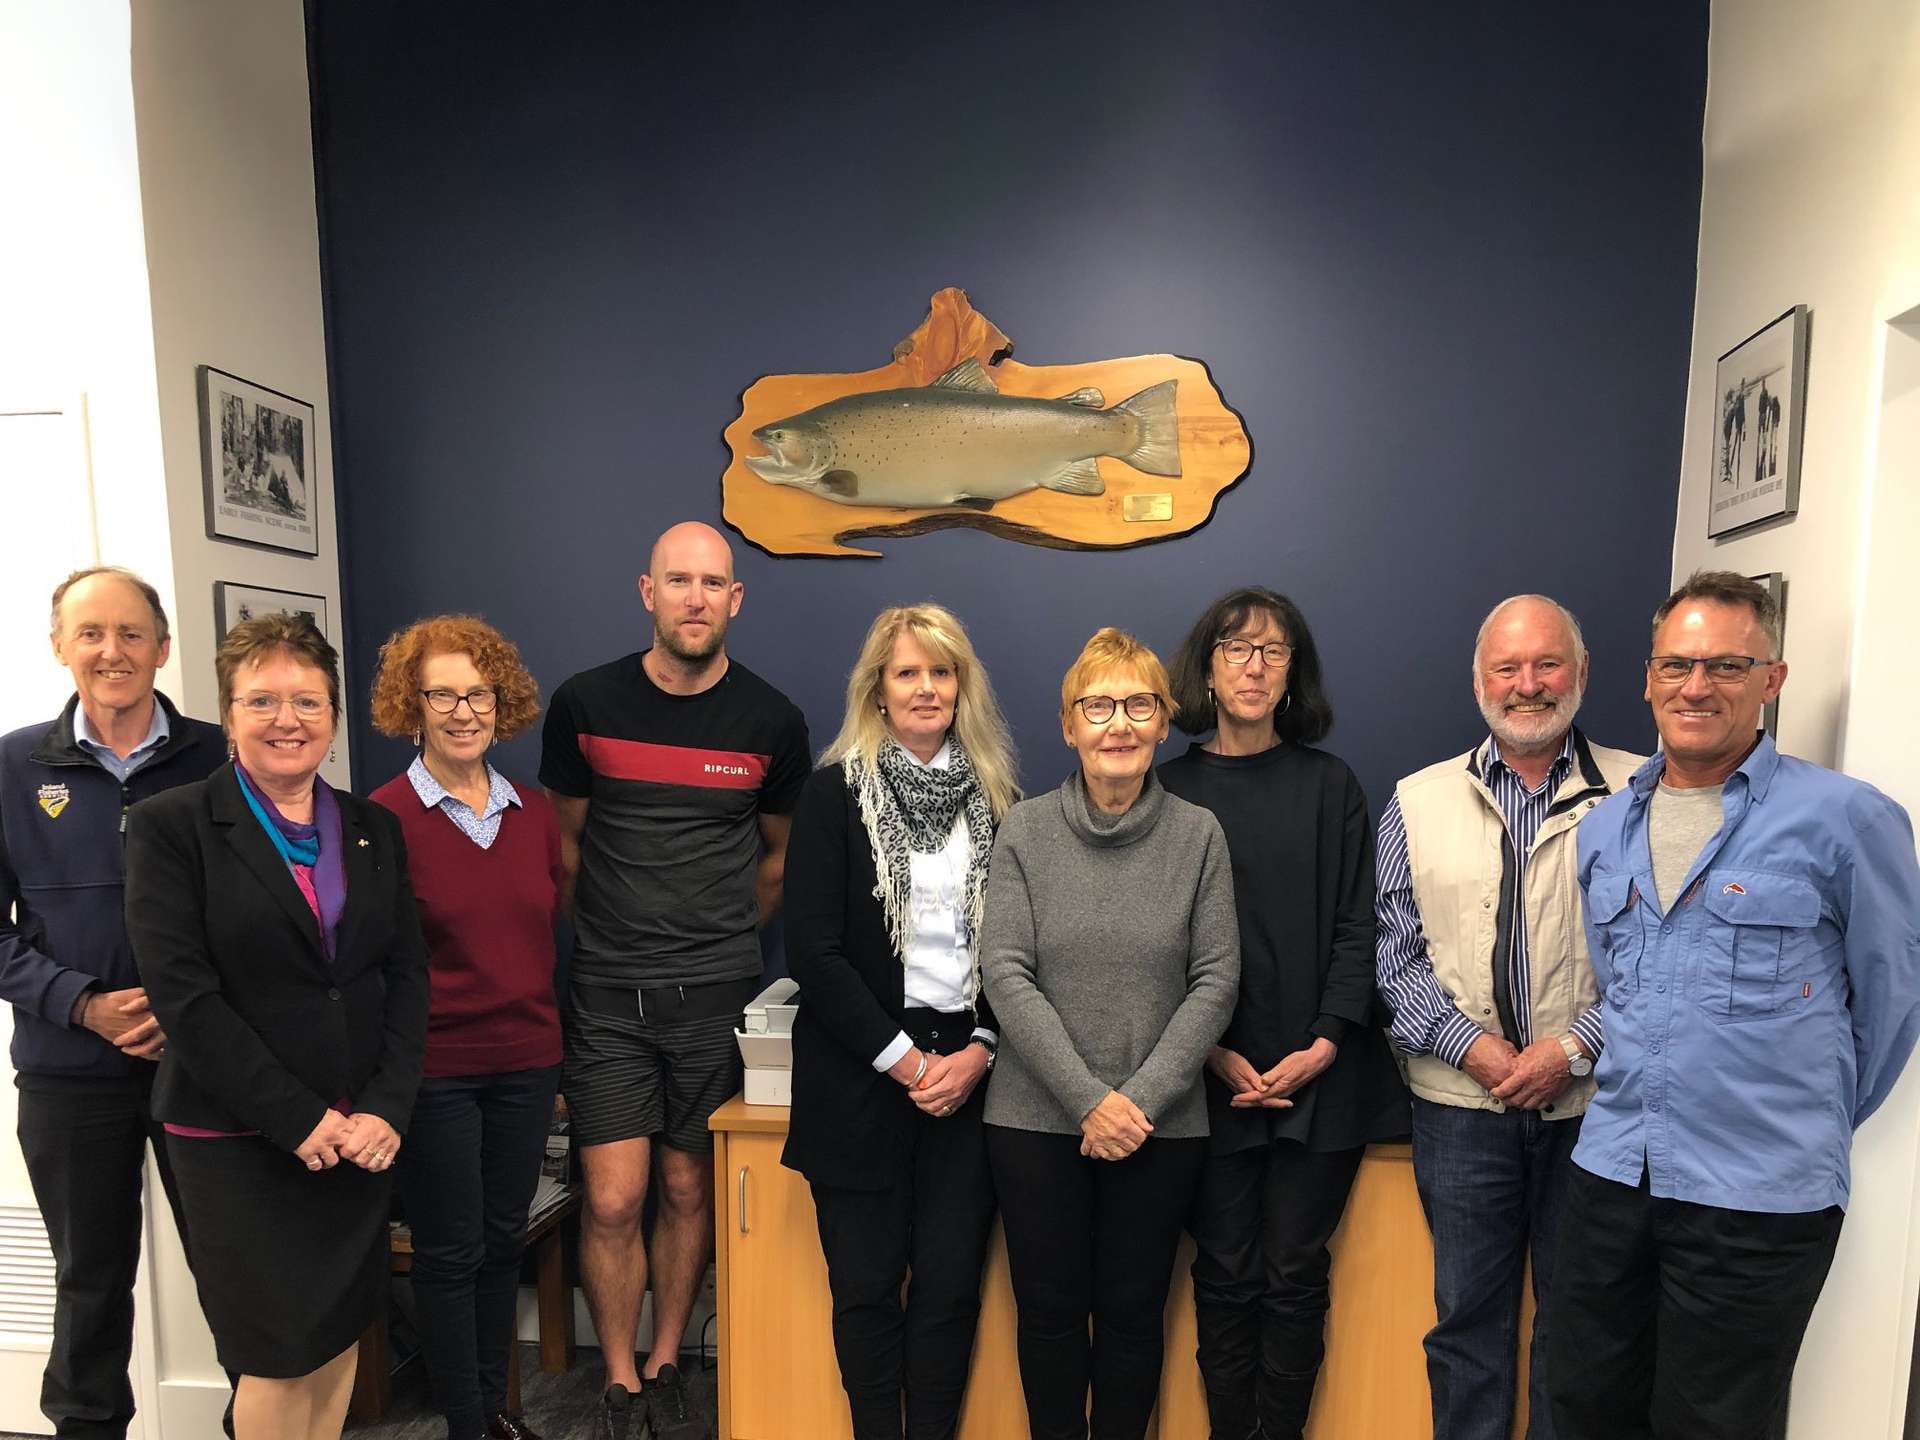 Group photo of the Inland Fisheries Advisory Council members 2020-21